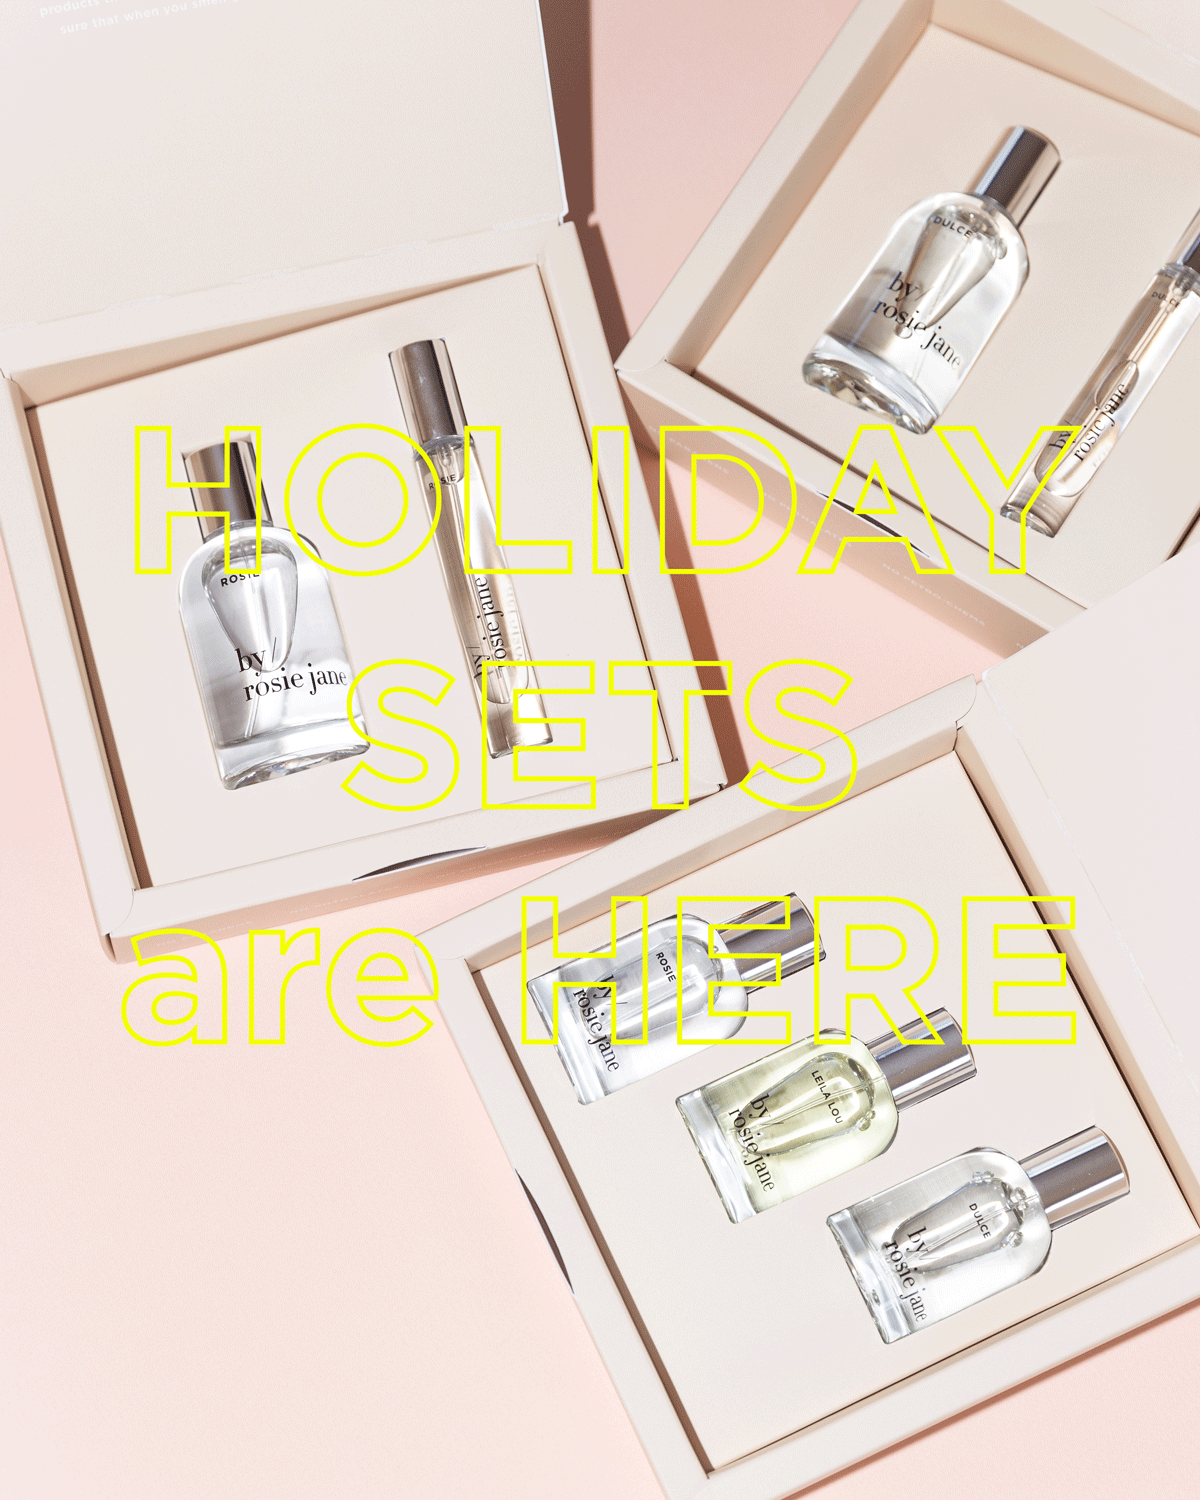 By Rosie Jane Holiday sets, including mini best sellers and home + away perfume sets